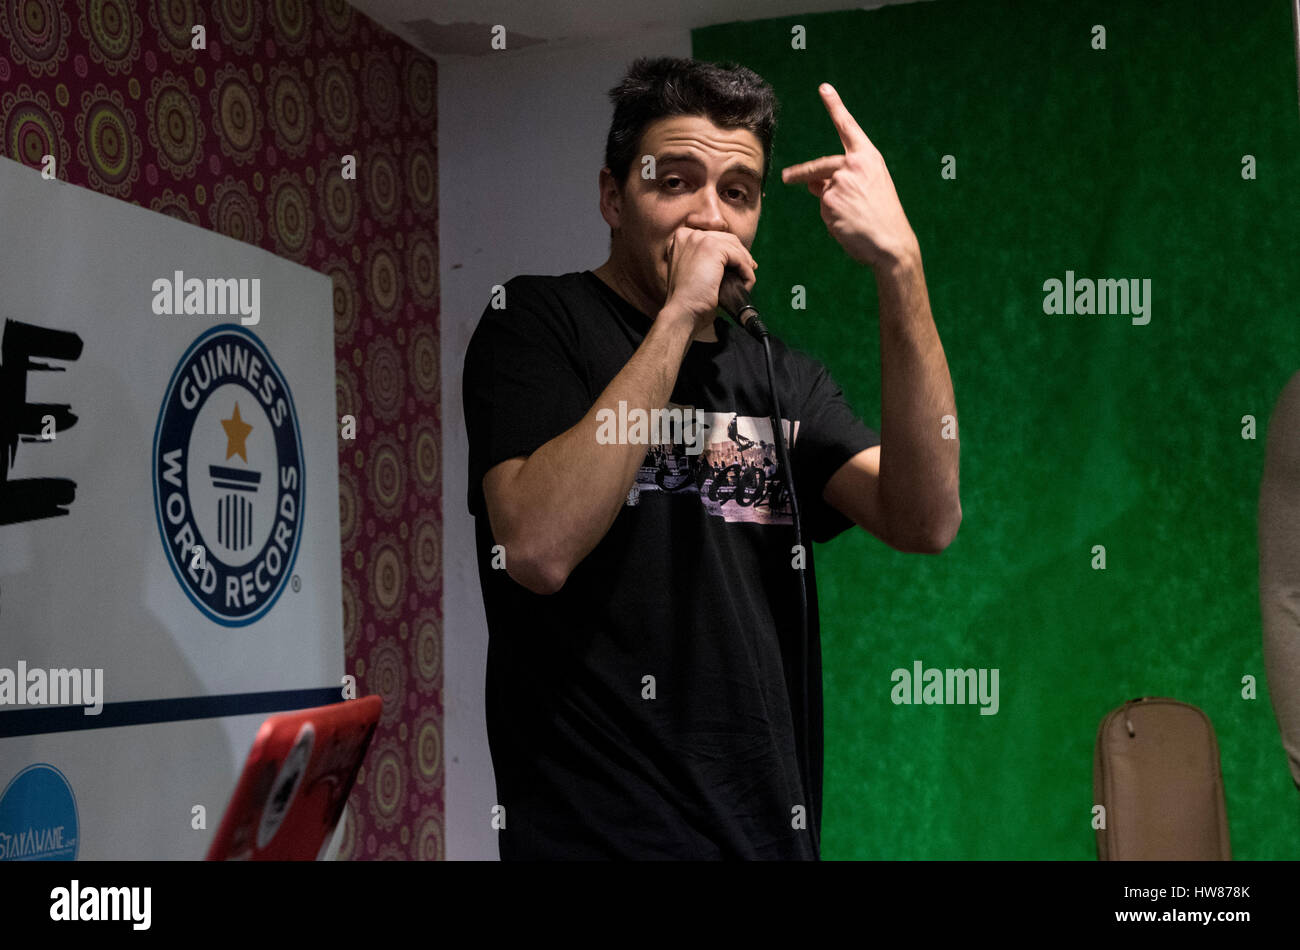 Savigliano, Italy, 18 march 2017. Italian rapper Shame tries to beat the 24 hour freestyle Guinnes world record at 28 lab concept store Credit: Alberto Gandolfo/Alamy Live News Stock Photo